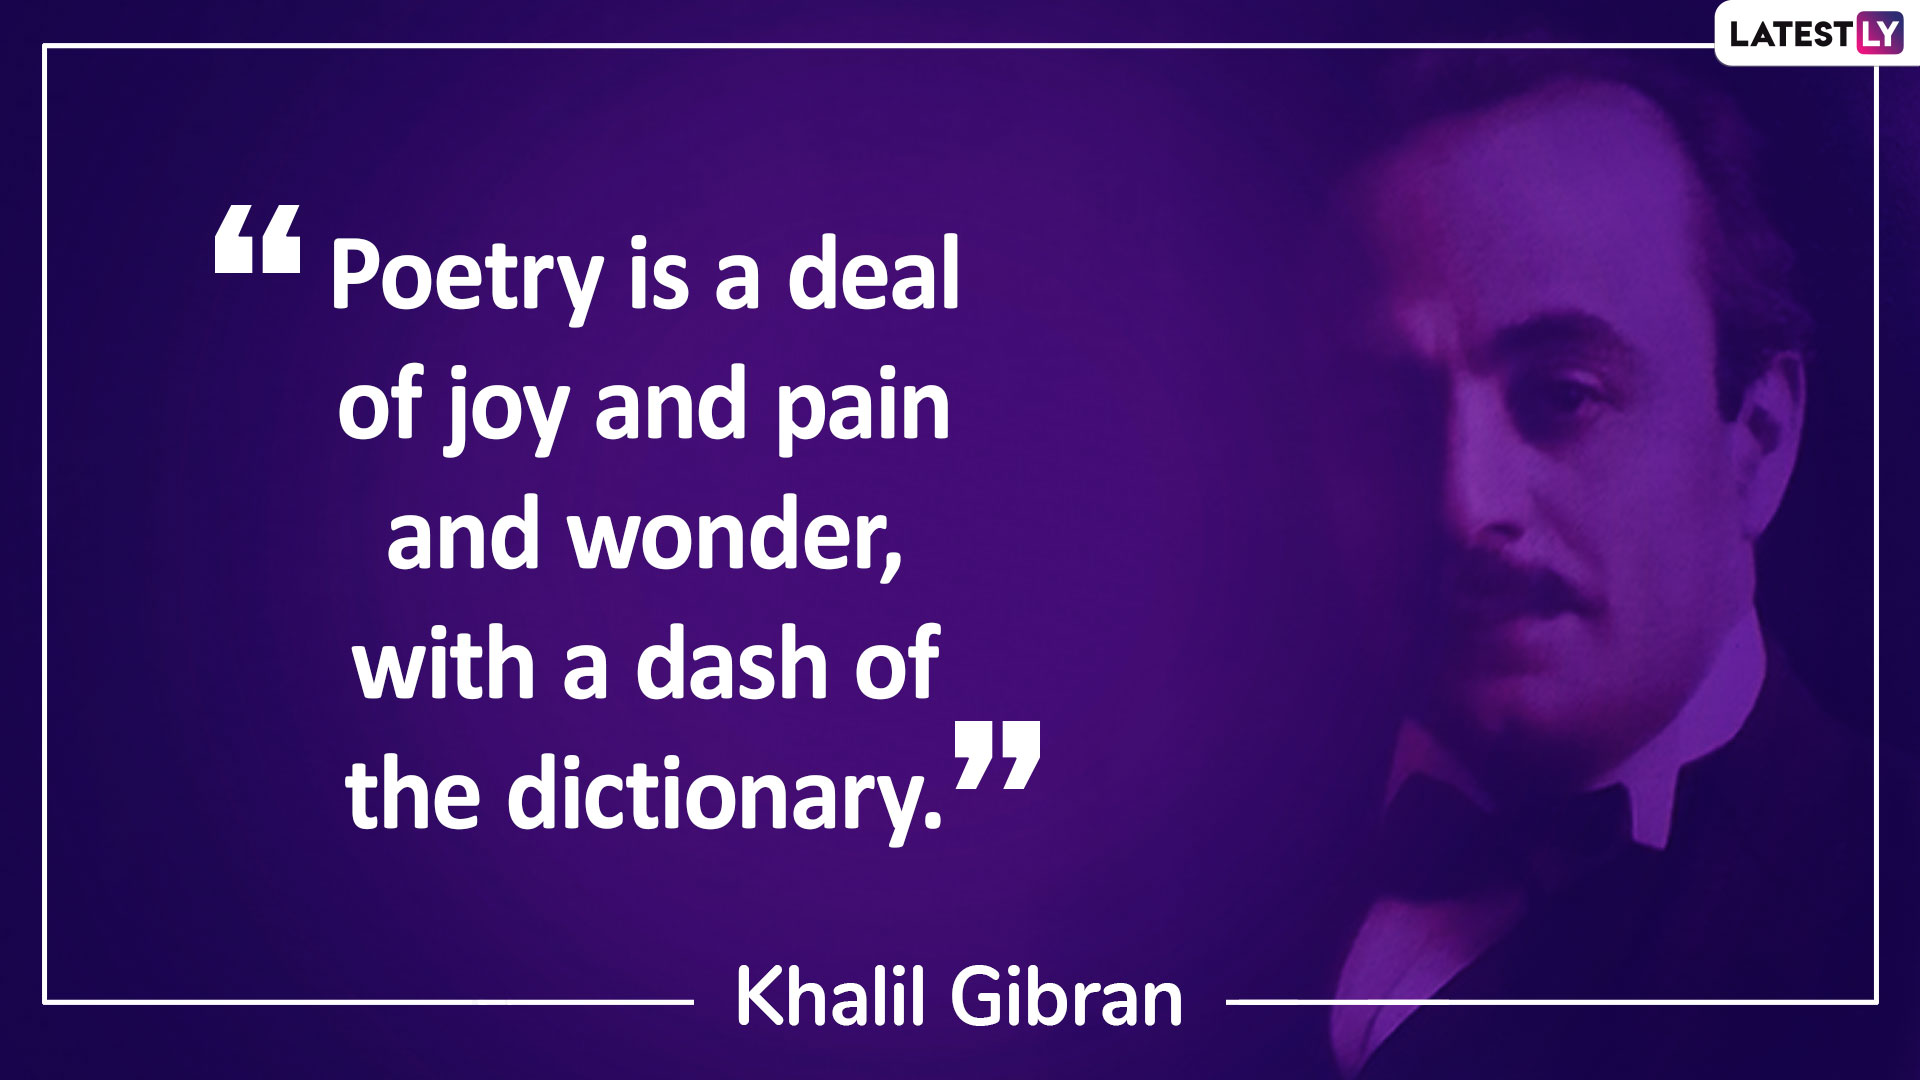 famous quotes on poetry